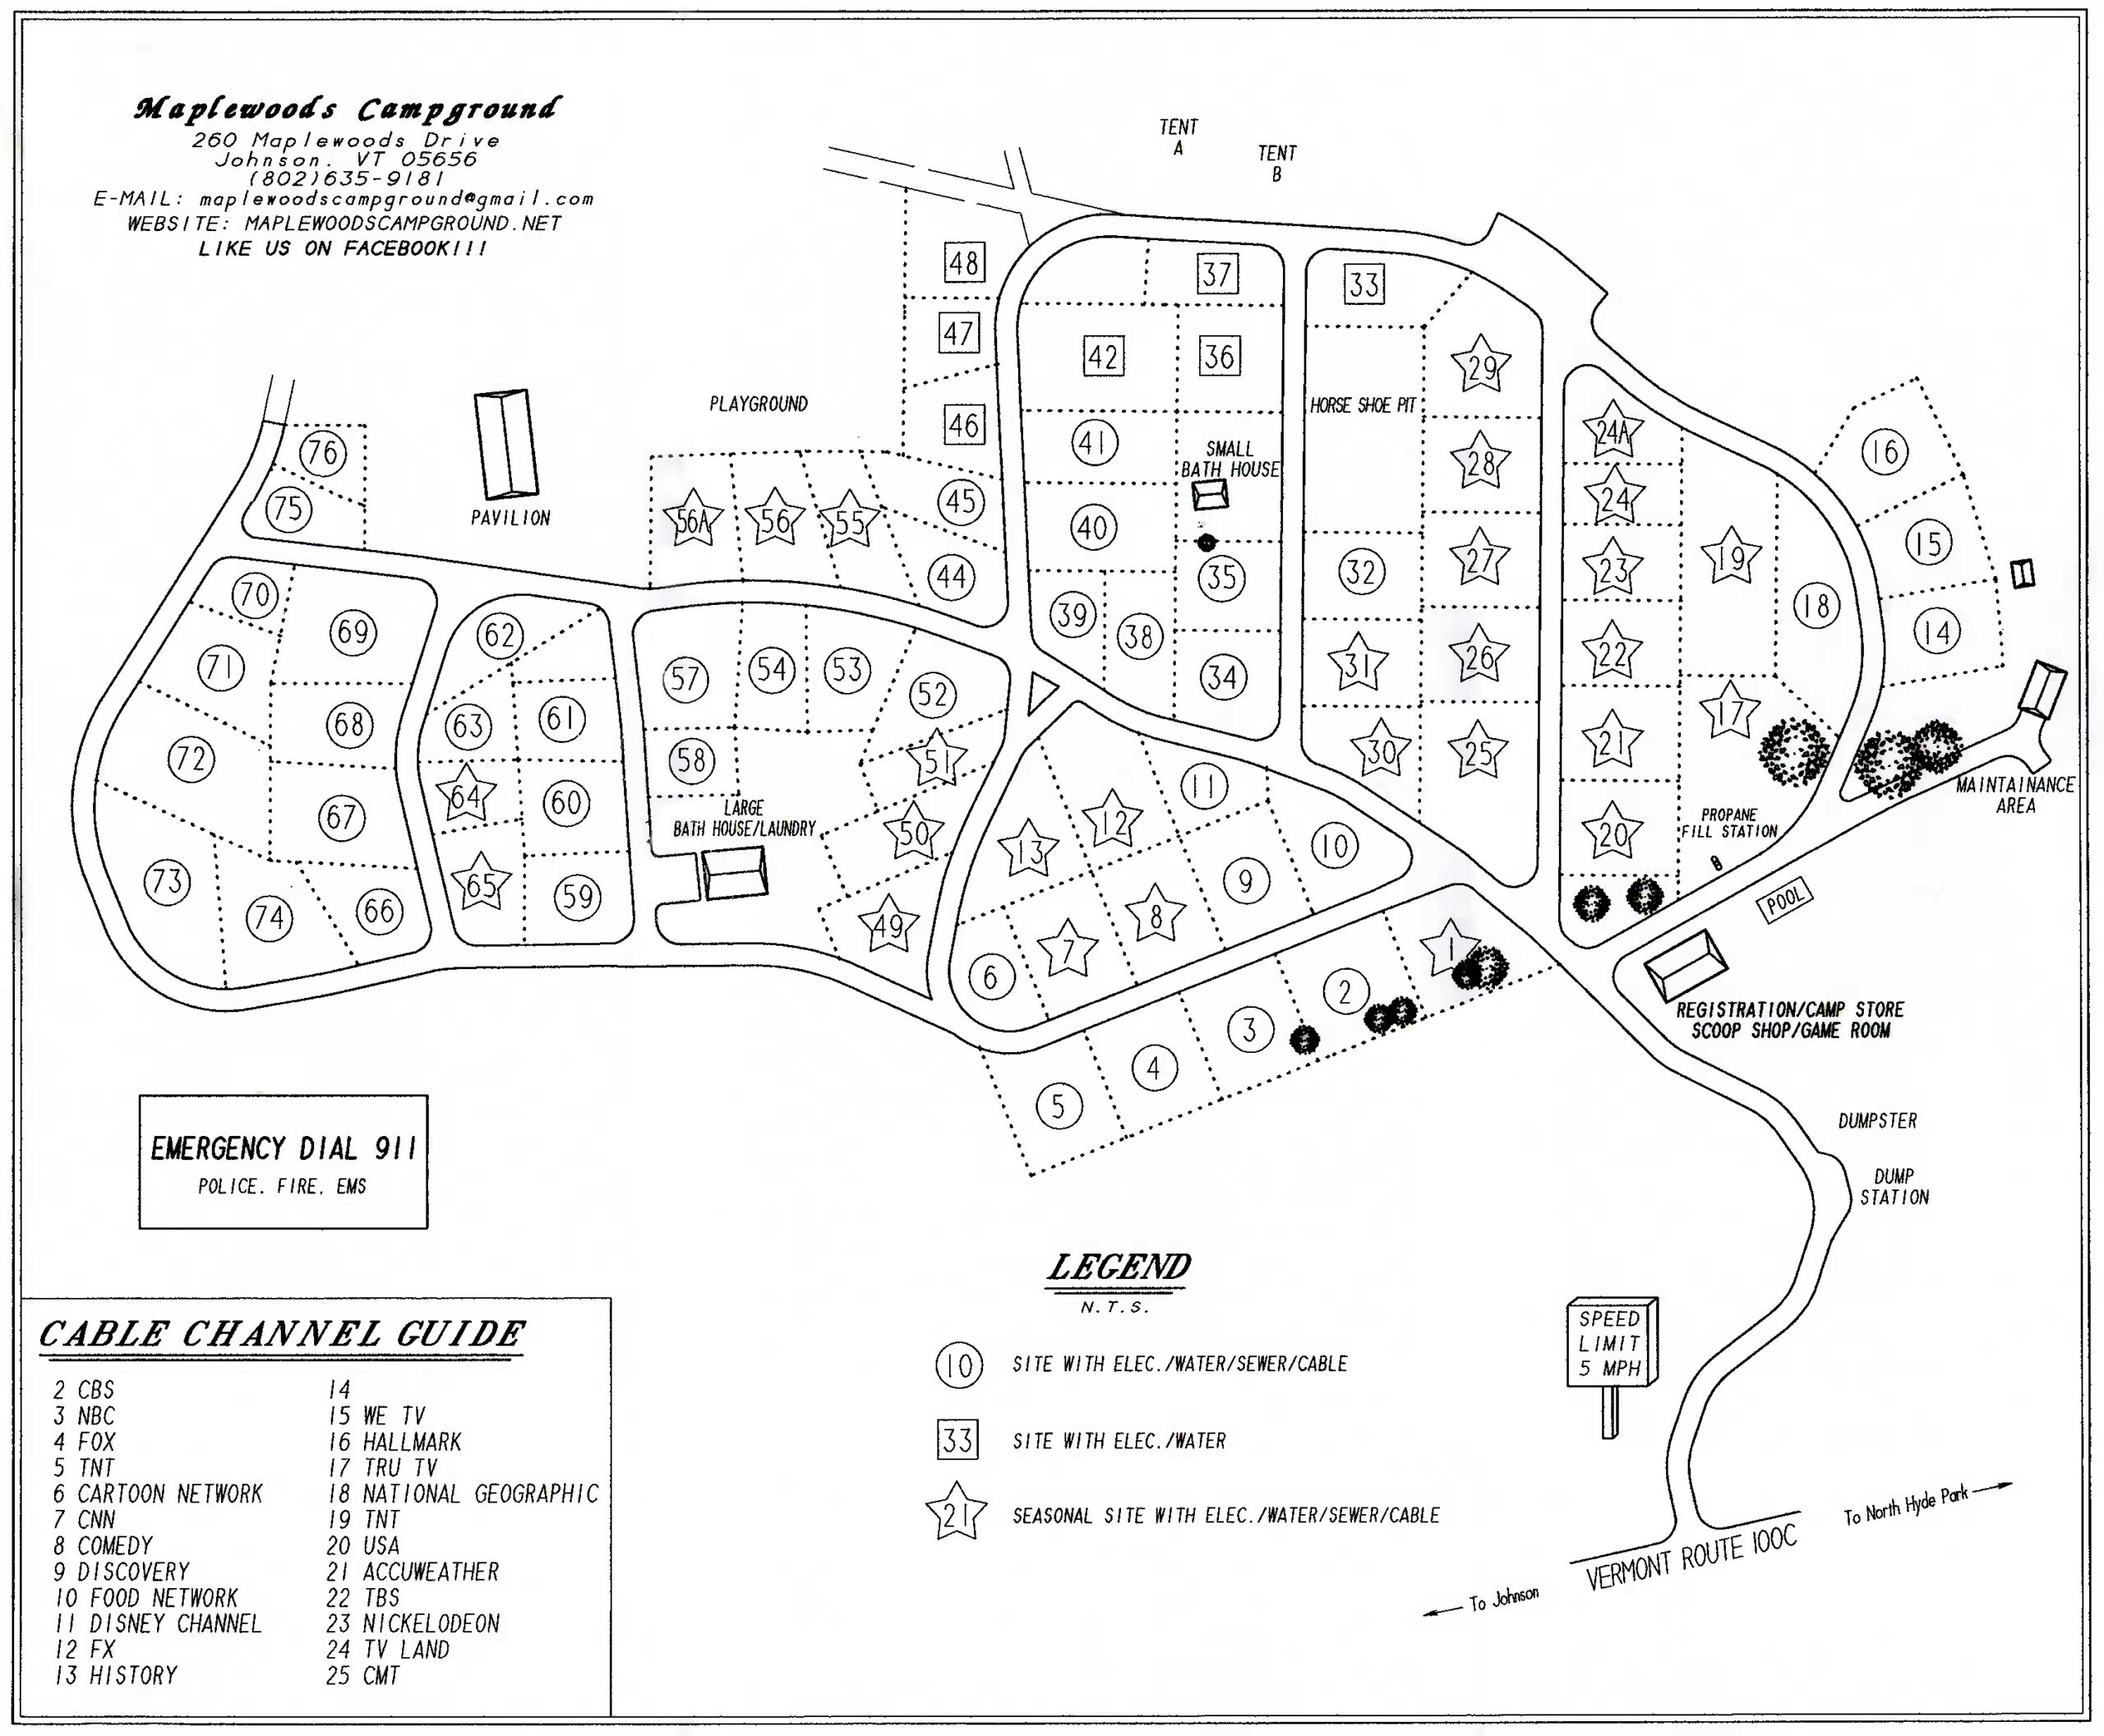 Maplewoods Campground site Map